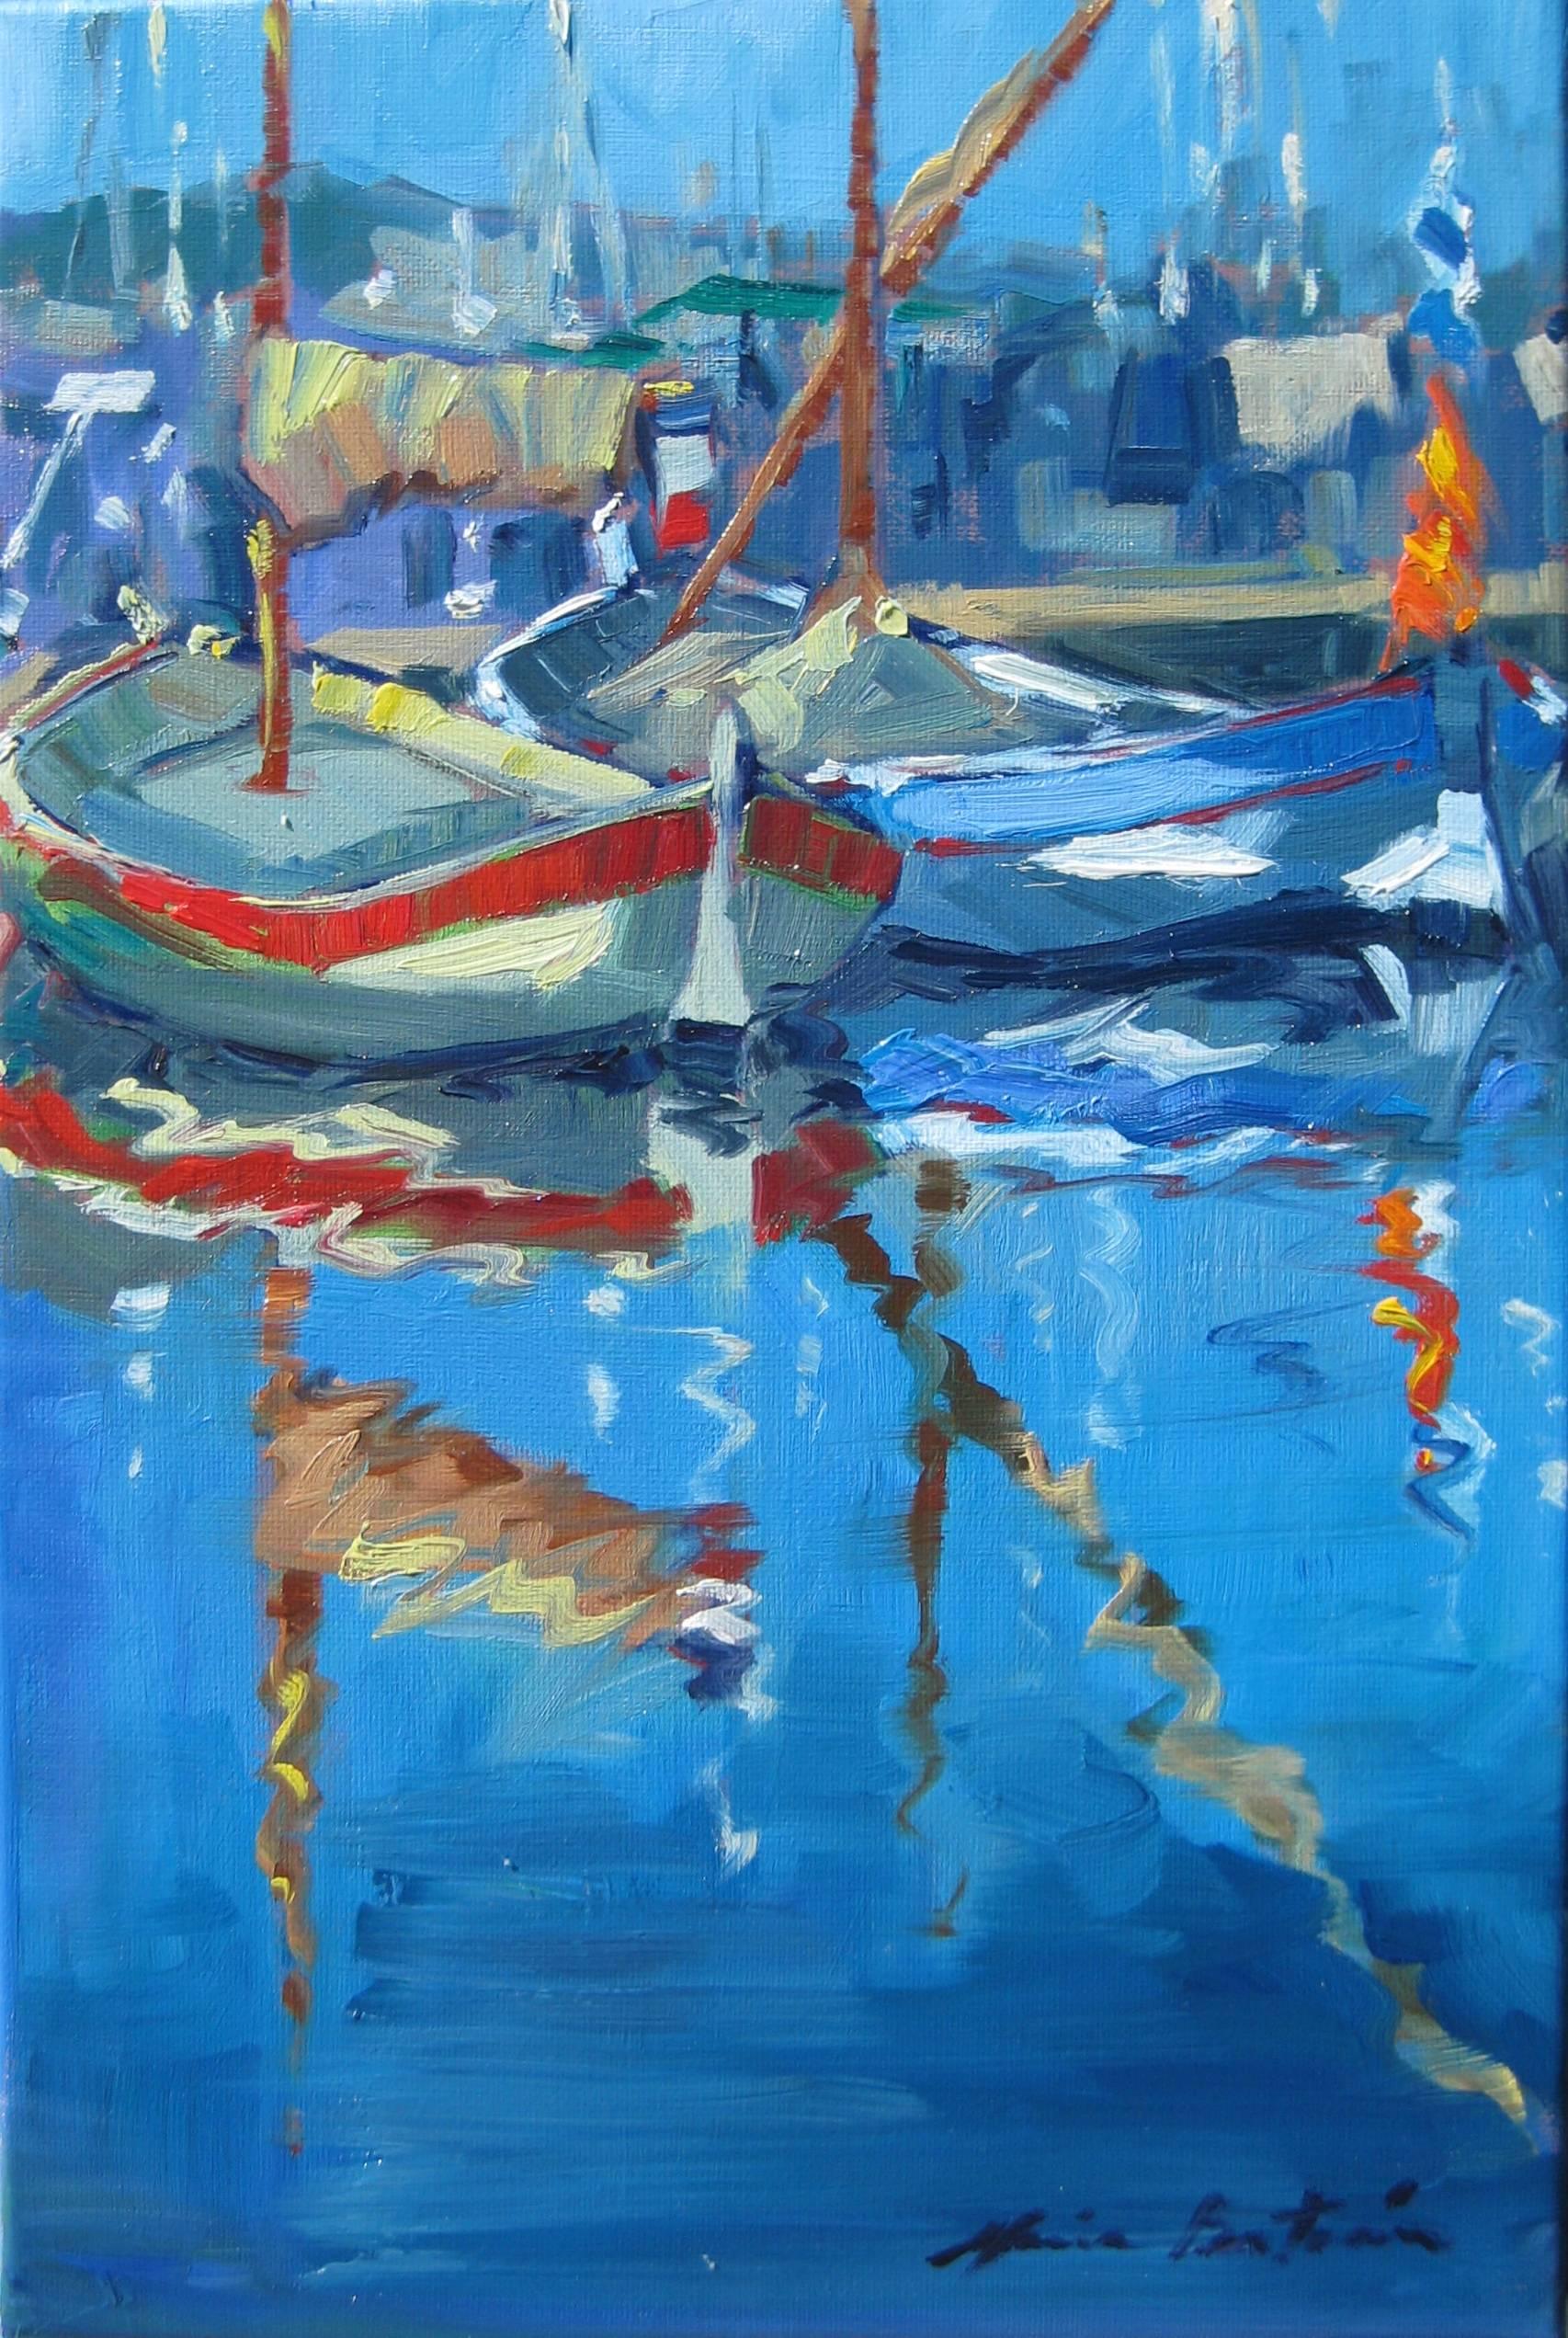 "Reflections of The Mast," Impressionist French Riviera Boats by Maria Bertran